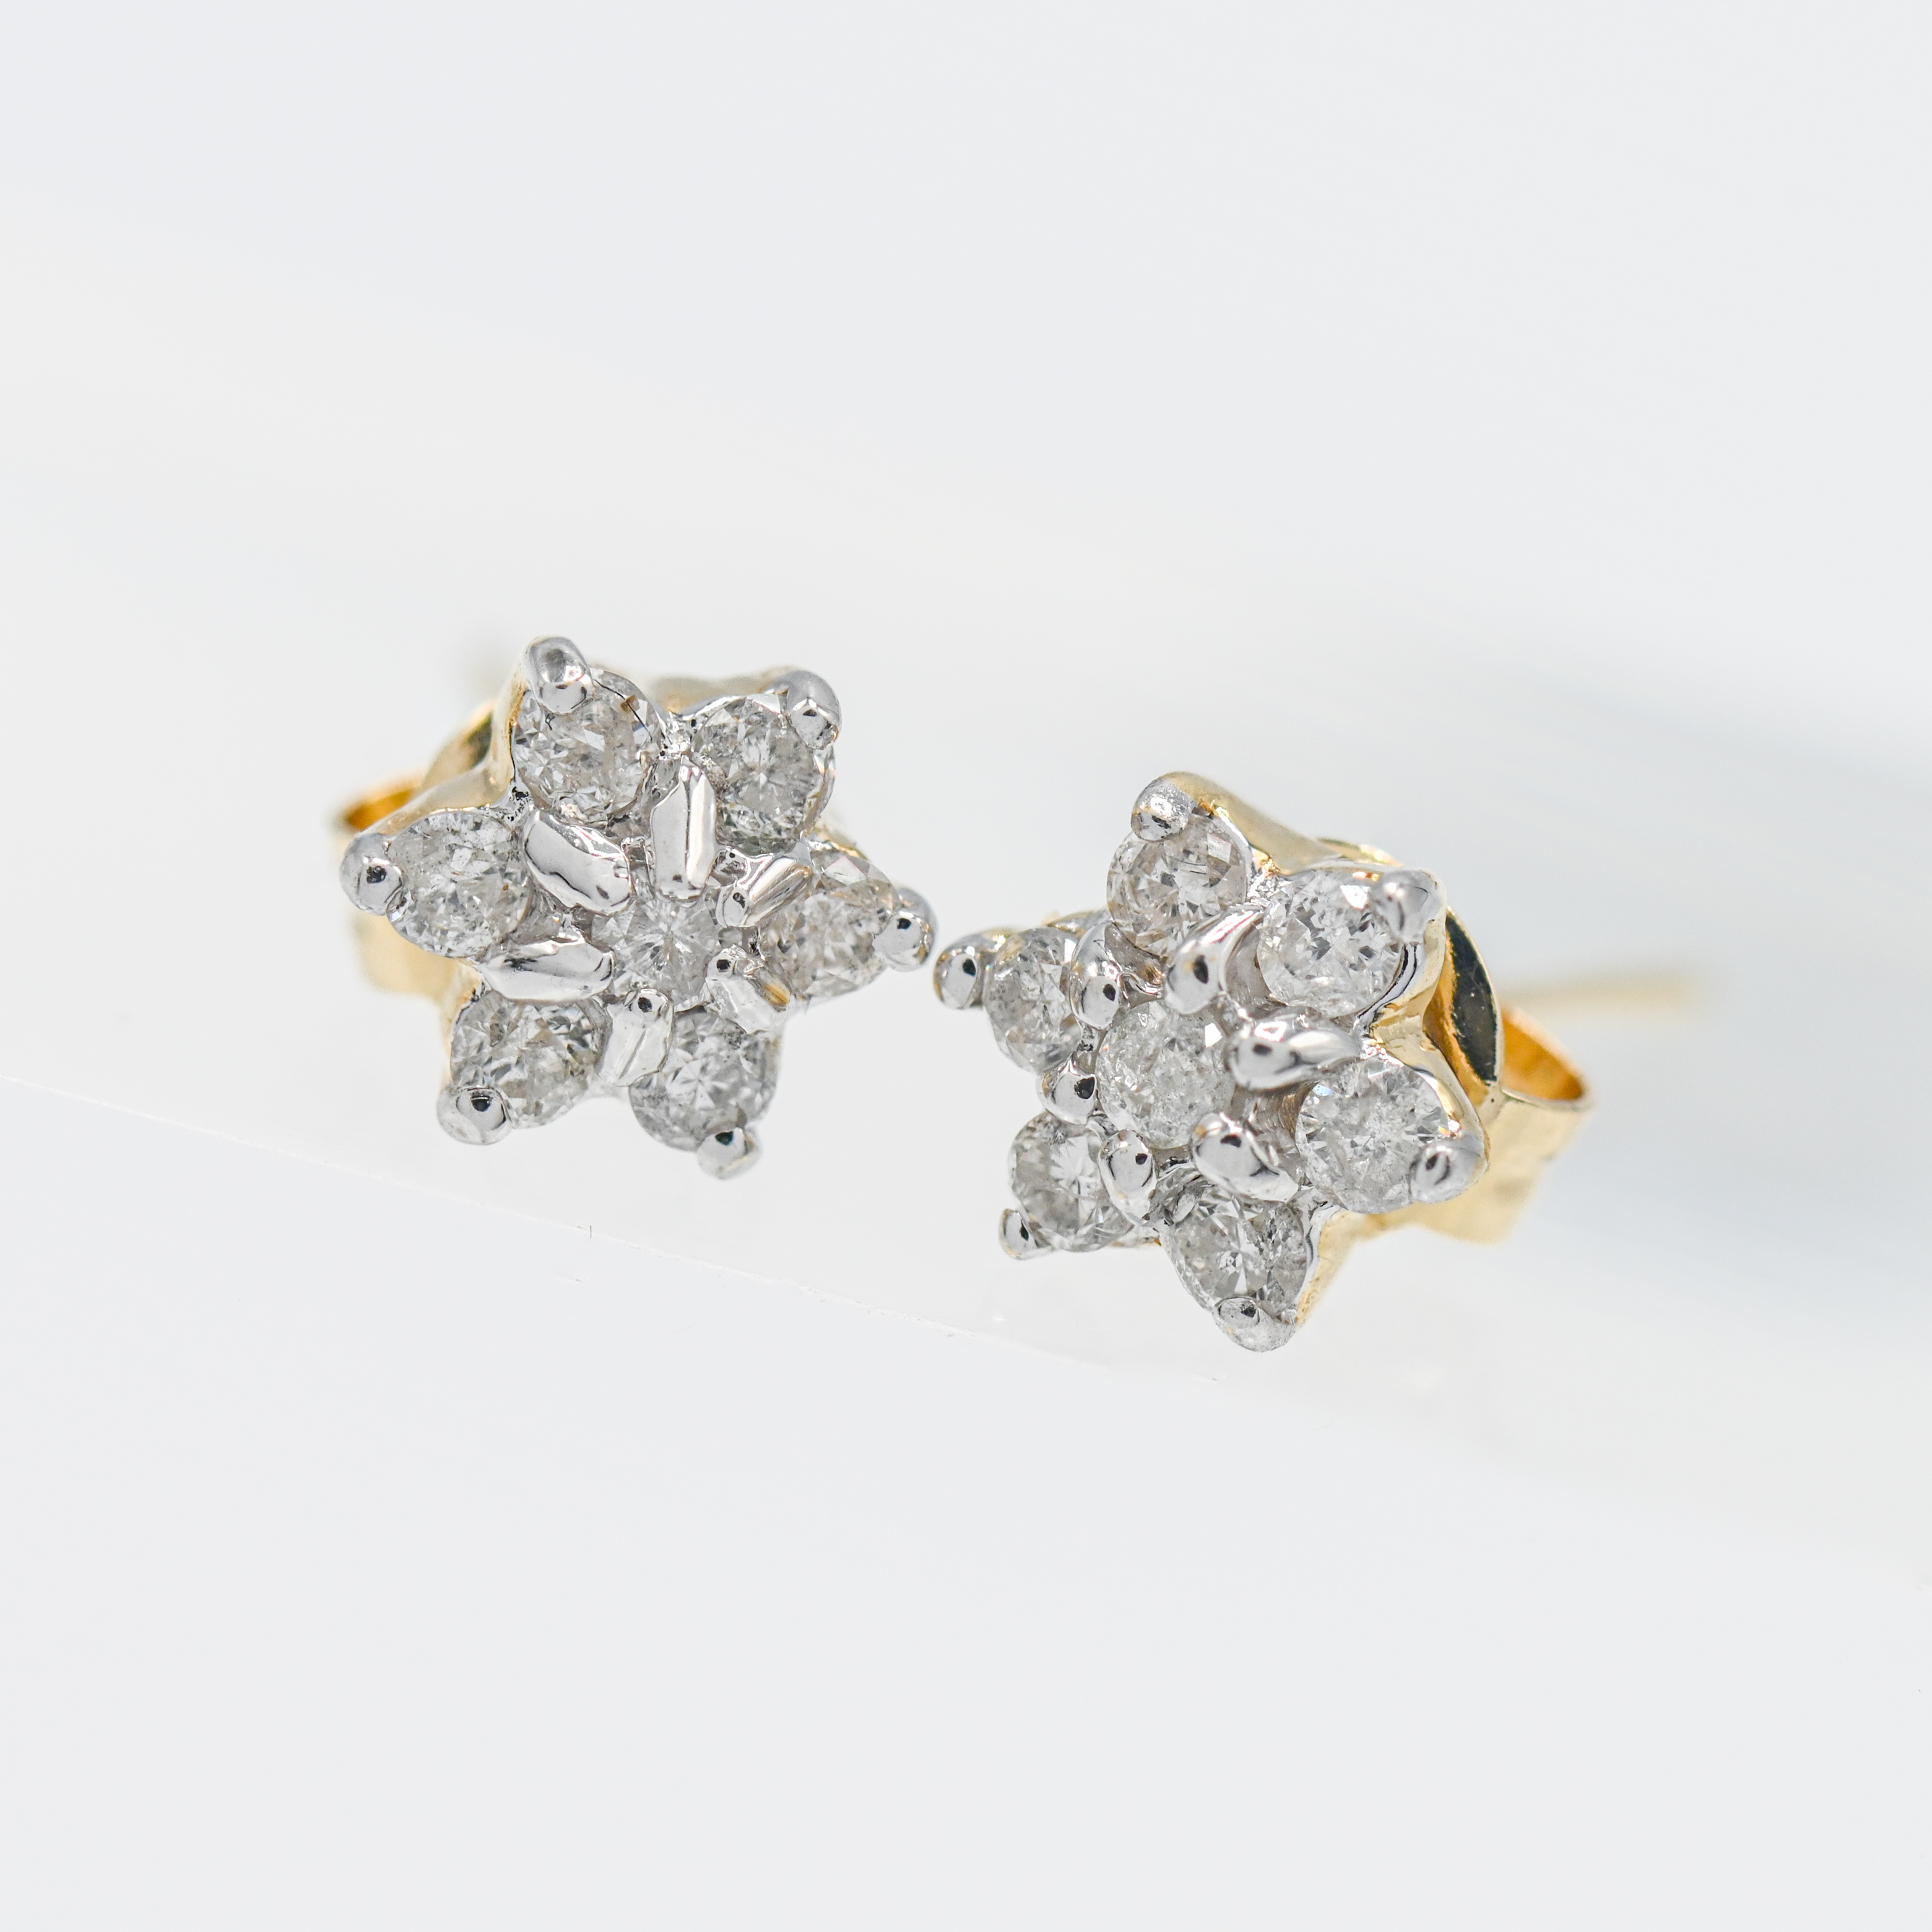 A pair of 14ct yellow gold diamond 'petal' style cluster earrings.